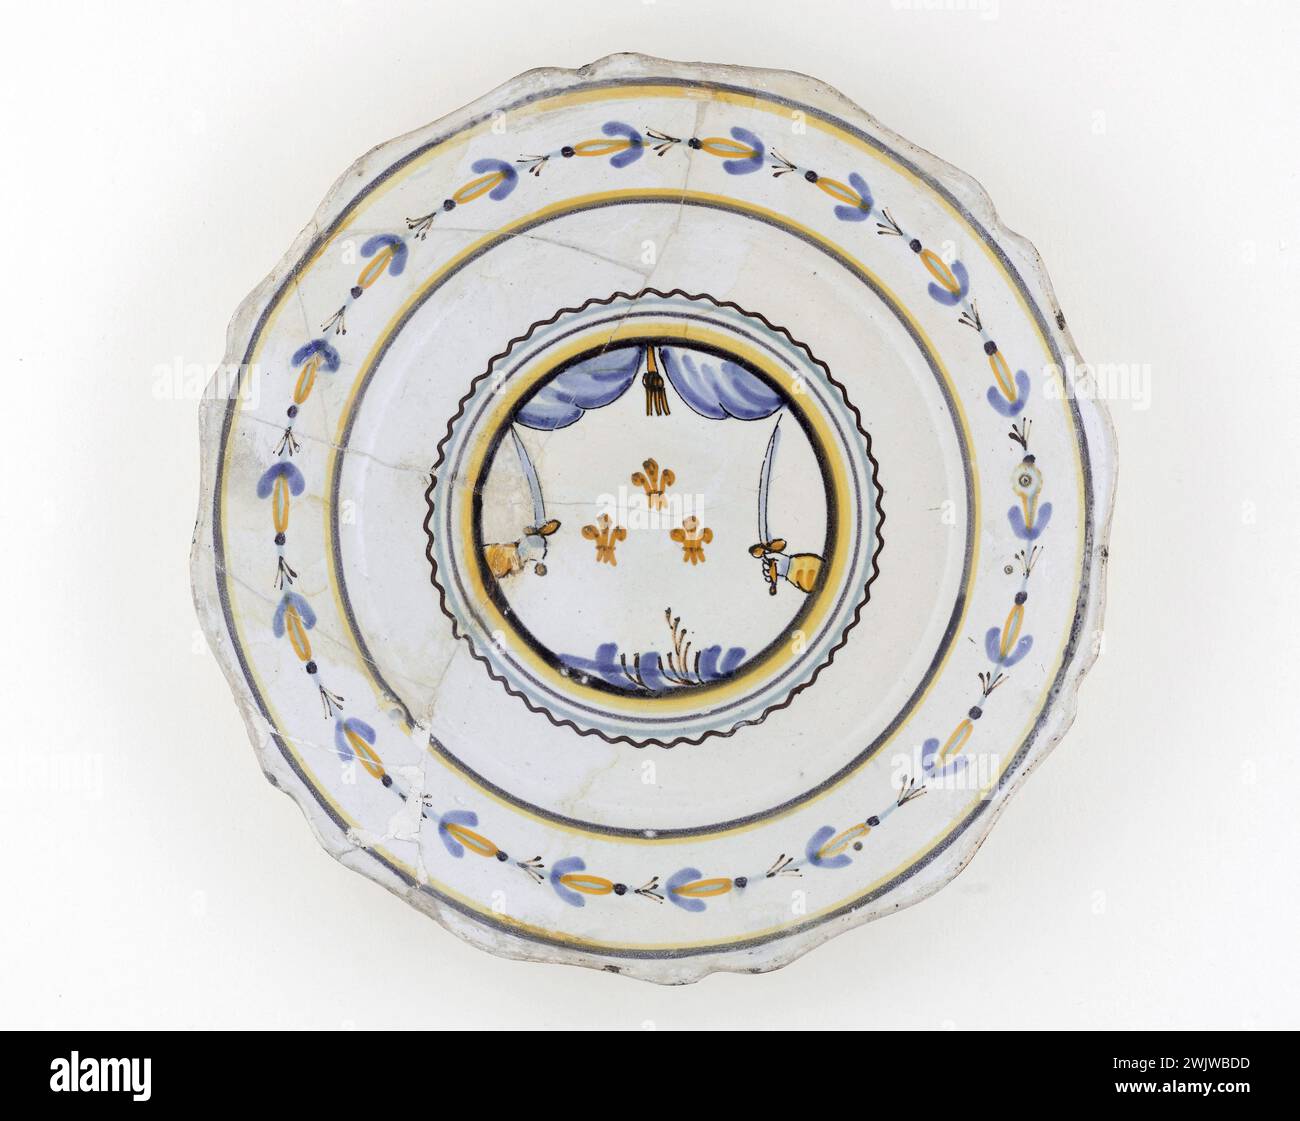 Anonymous. Plate. Earthenware. 1789. Paris, Carnavalet museum. 70955-1 Weapon, Epee, Faience, Fleur, Lys, Decorative Pattern, Revolutionary Periode, French Revolution, Crockery, Plate Stock Photo